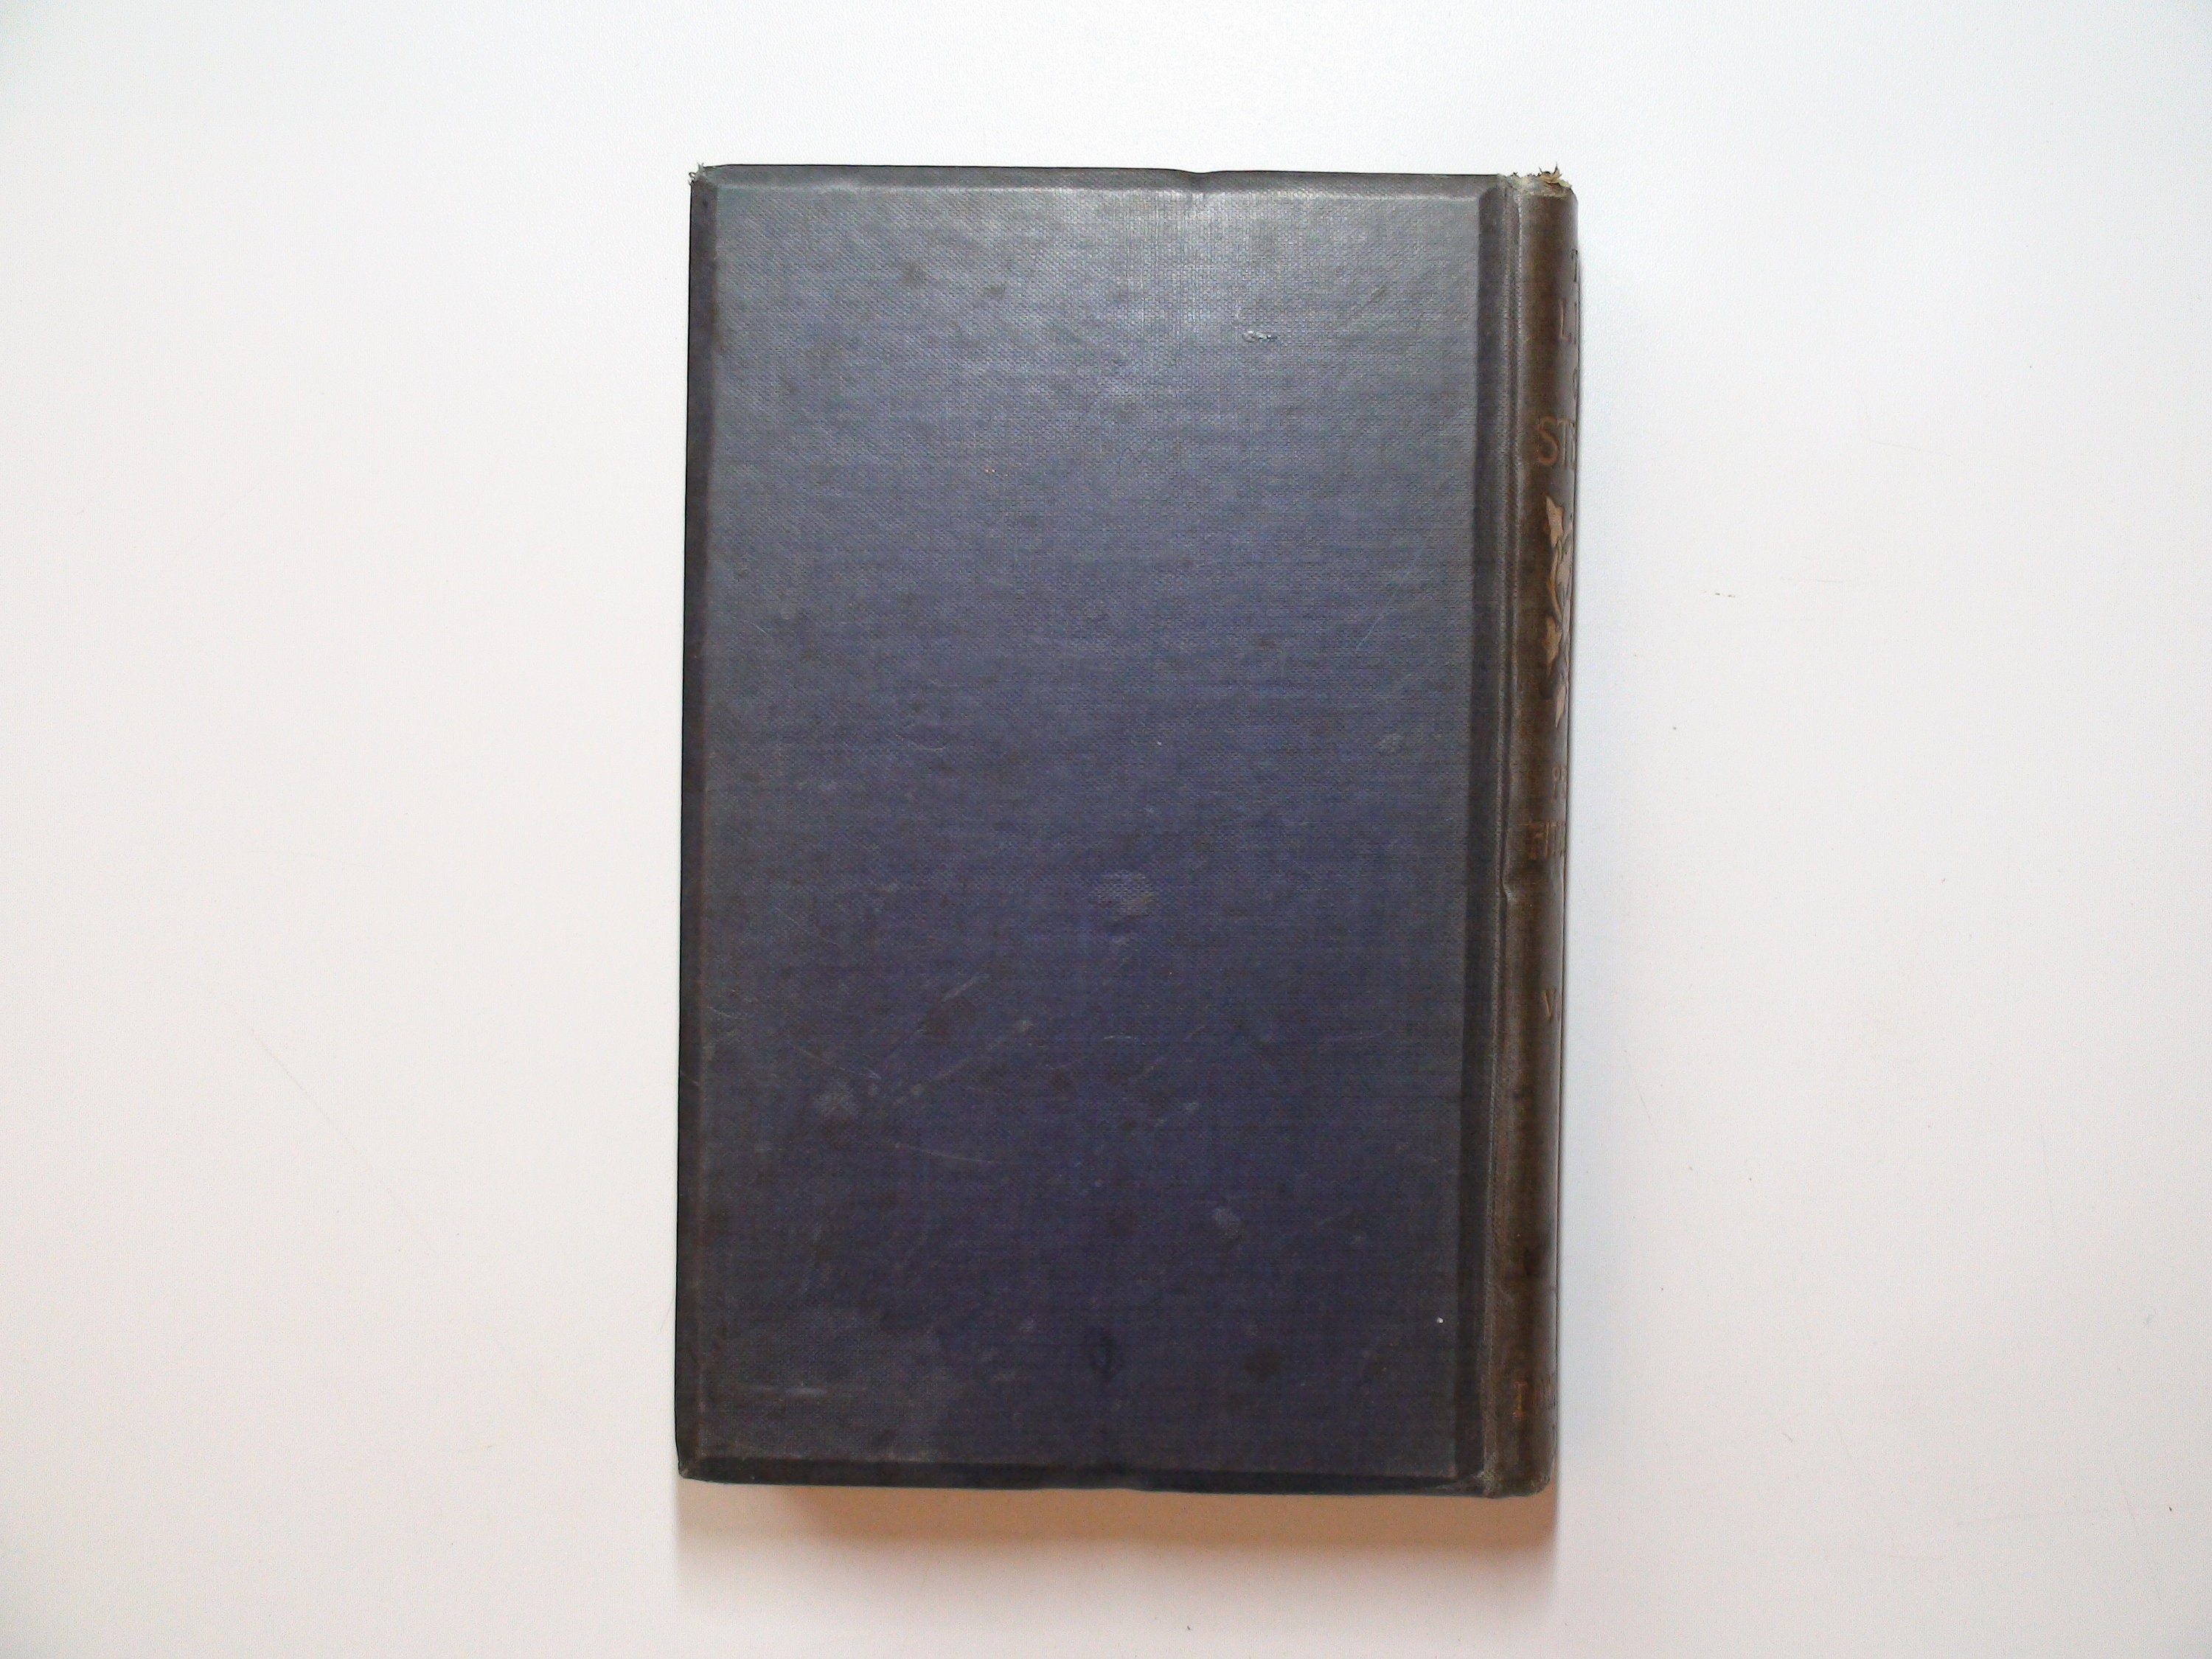 The Life Of Laurence Sterne By Percy Fitzgerald, 1st Ed, VOL II Only, 1896